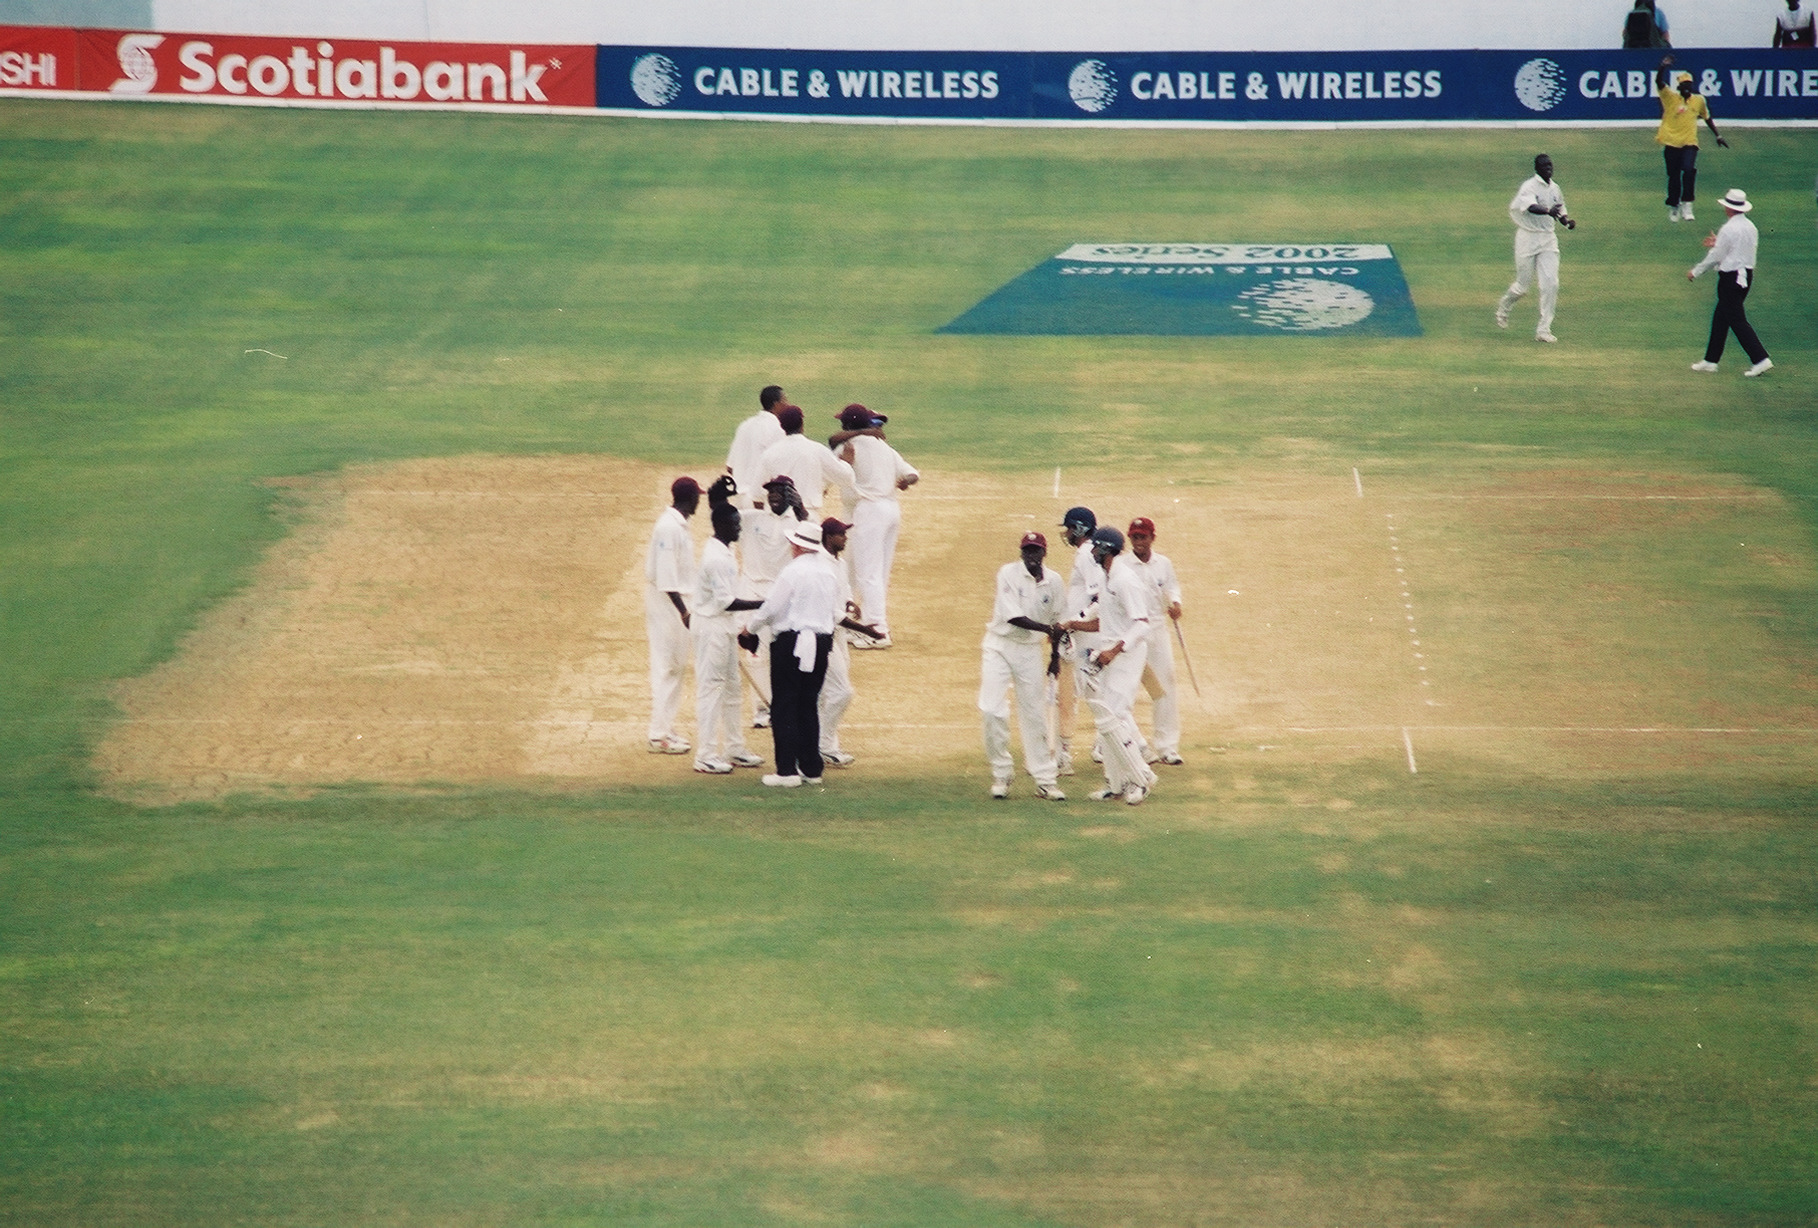 Victory for West Indies at Sabina Park in Jamaica 2002